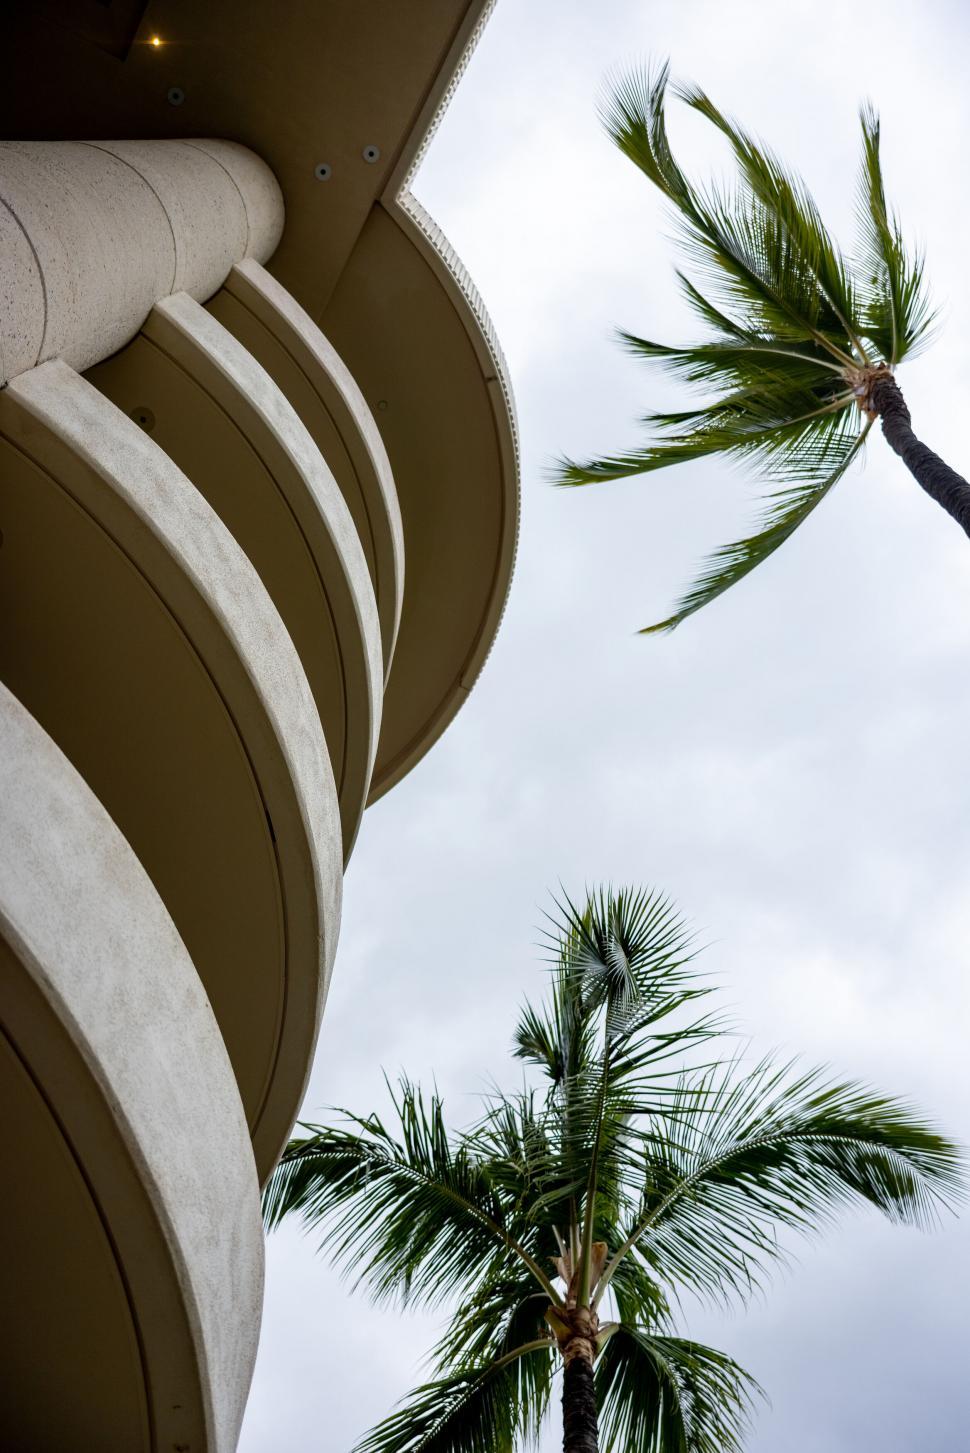 Free Image of Curved architecture and palm trees against sky 